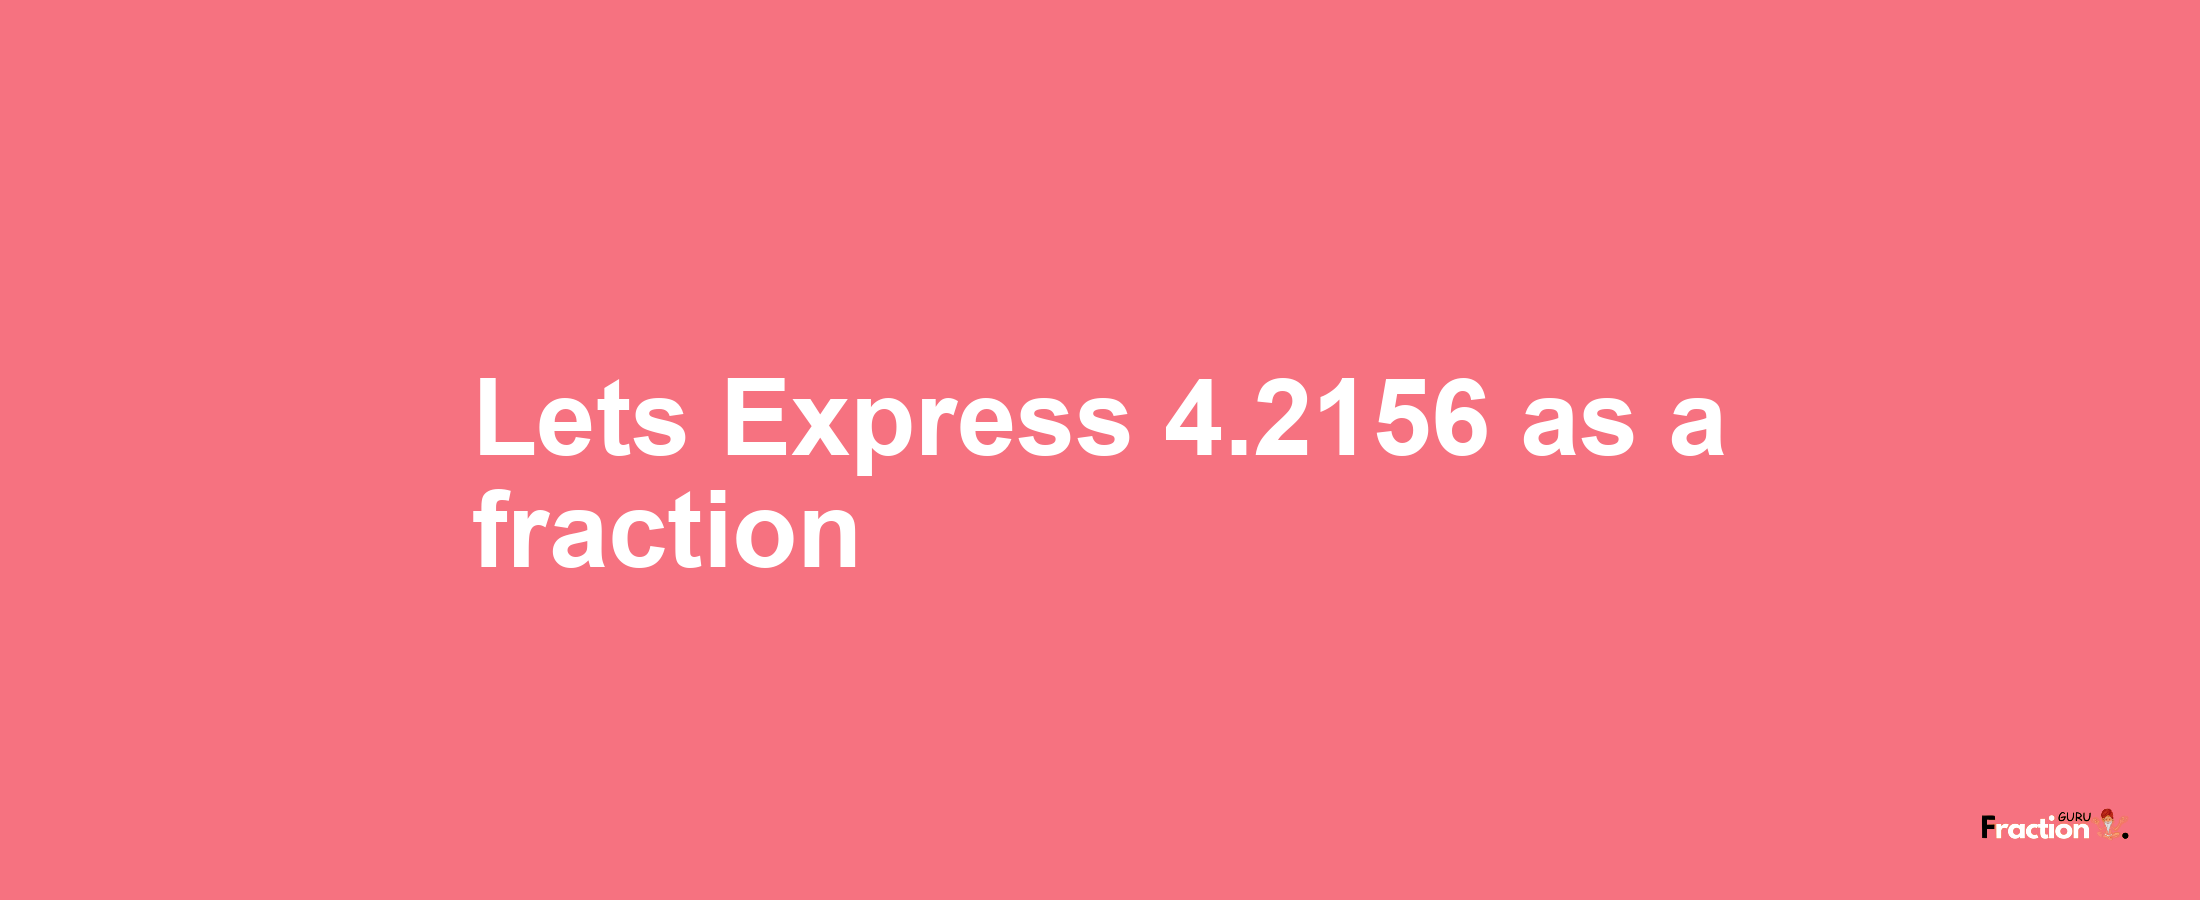 Lets Express 4.2156 as afraction